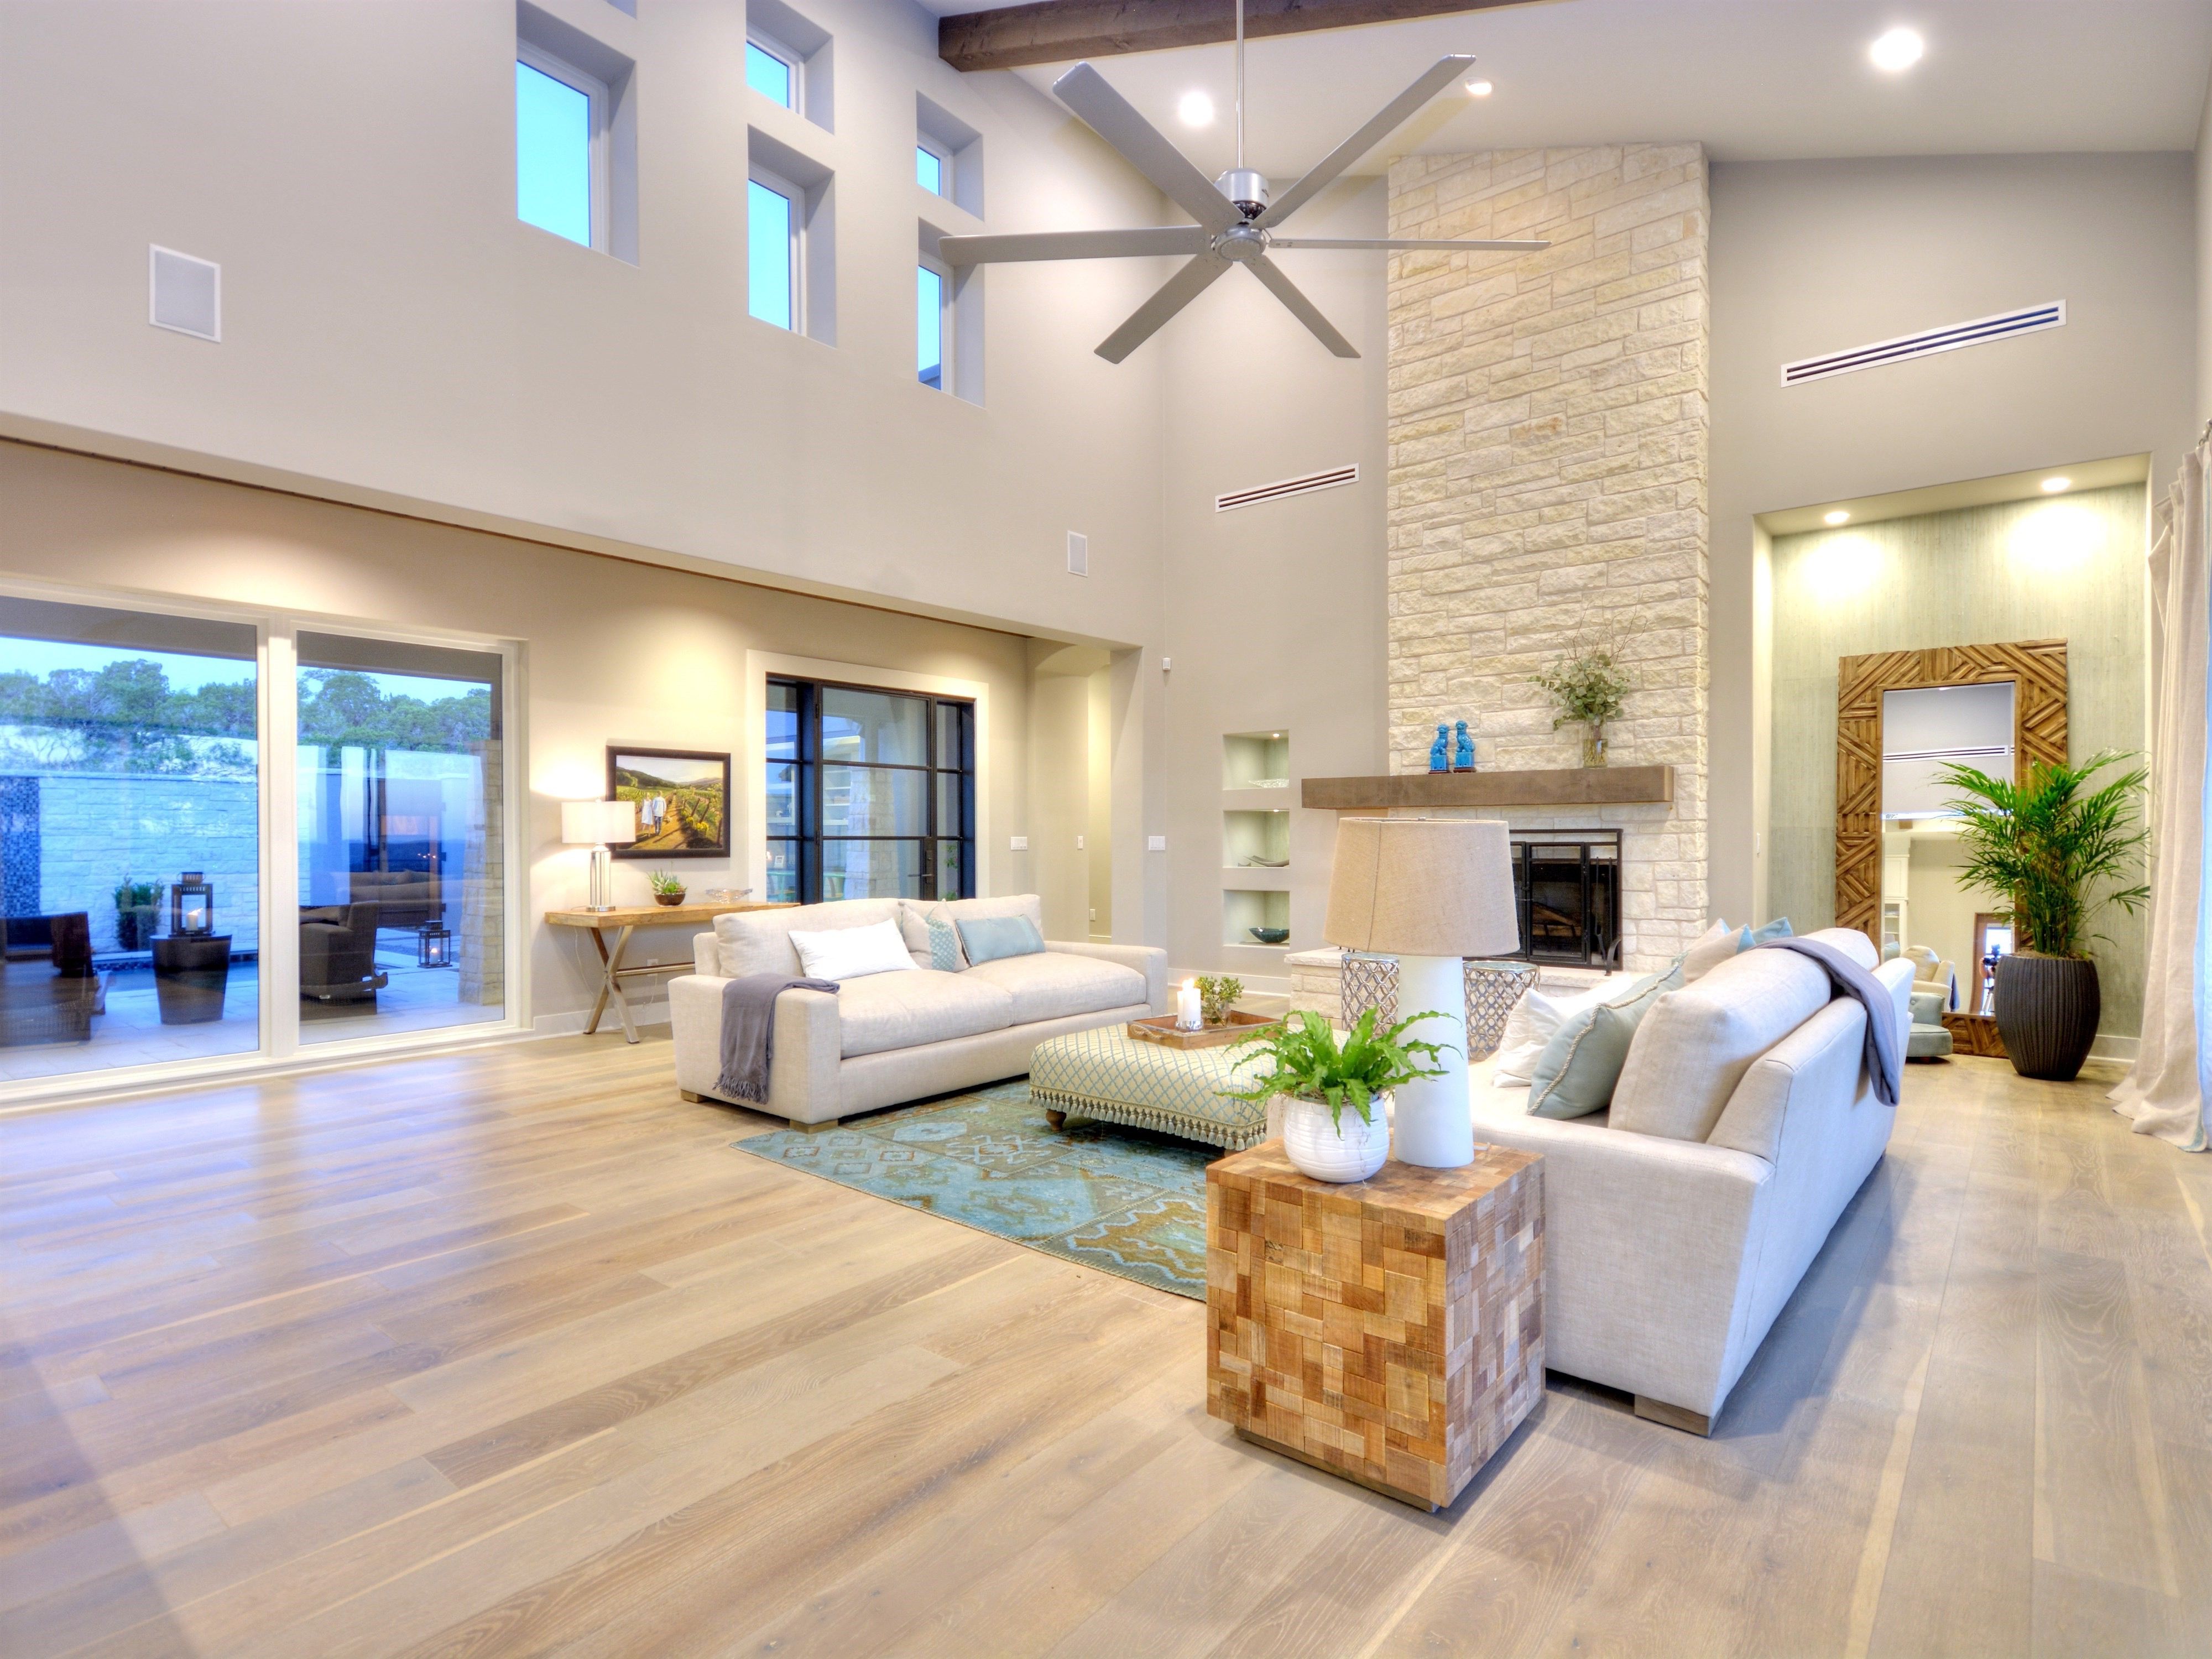 Contemporary Living Room With Light Hardwood Flooring (View 5 of 34)